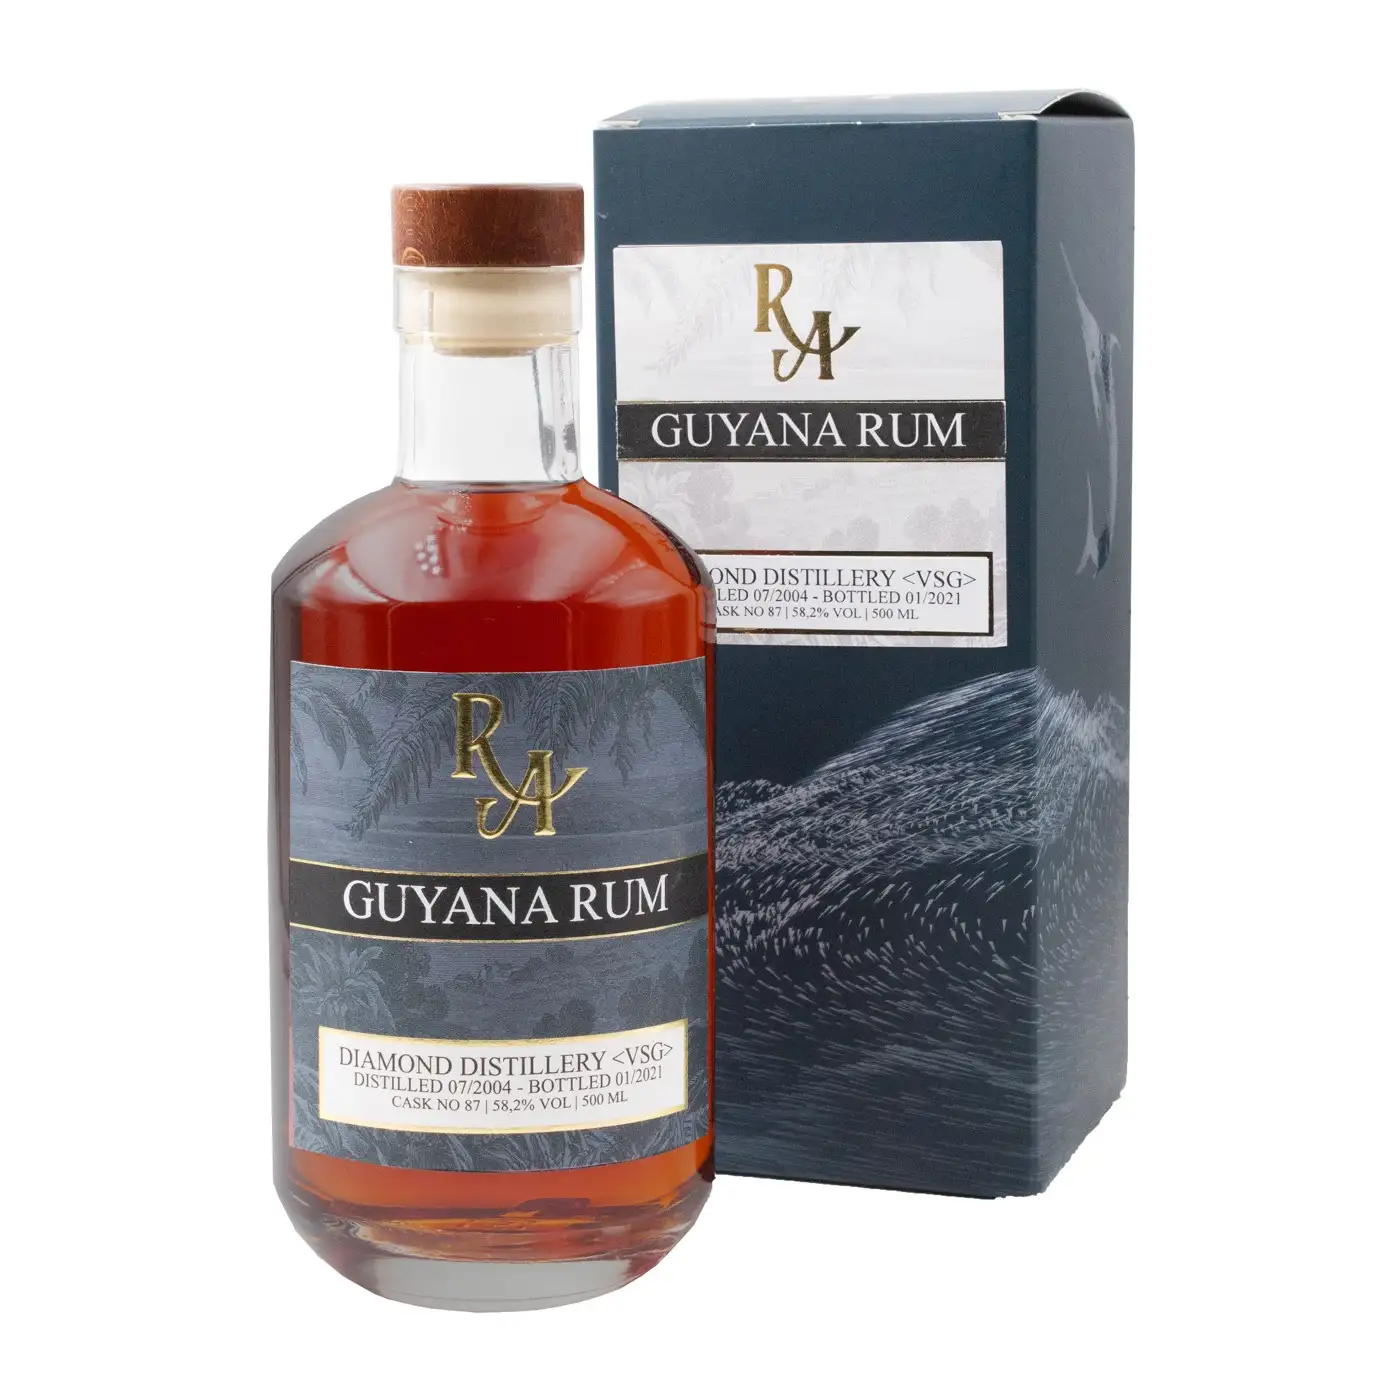 Image of the front of the bottle of the rum Rum Artesanal Guyana Rum VSG